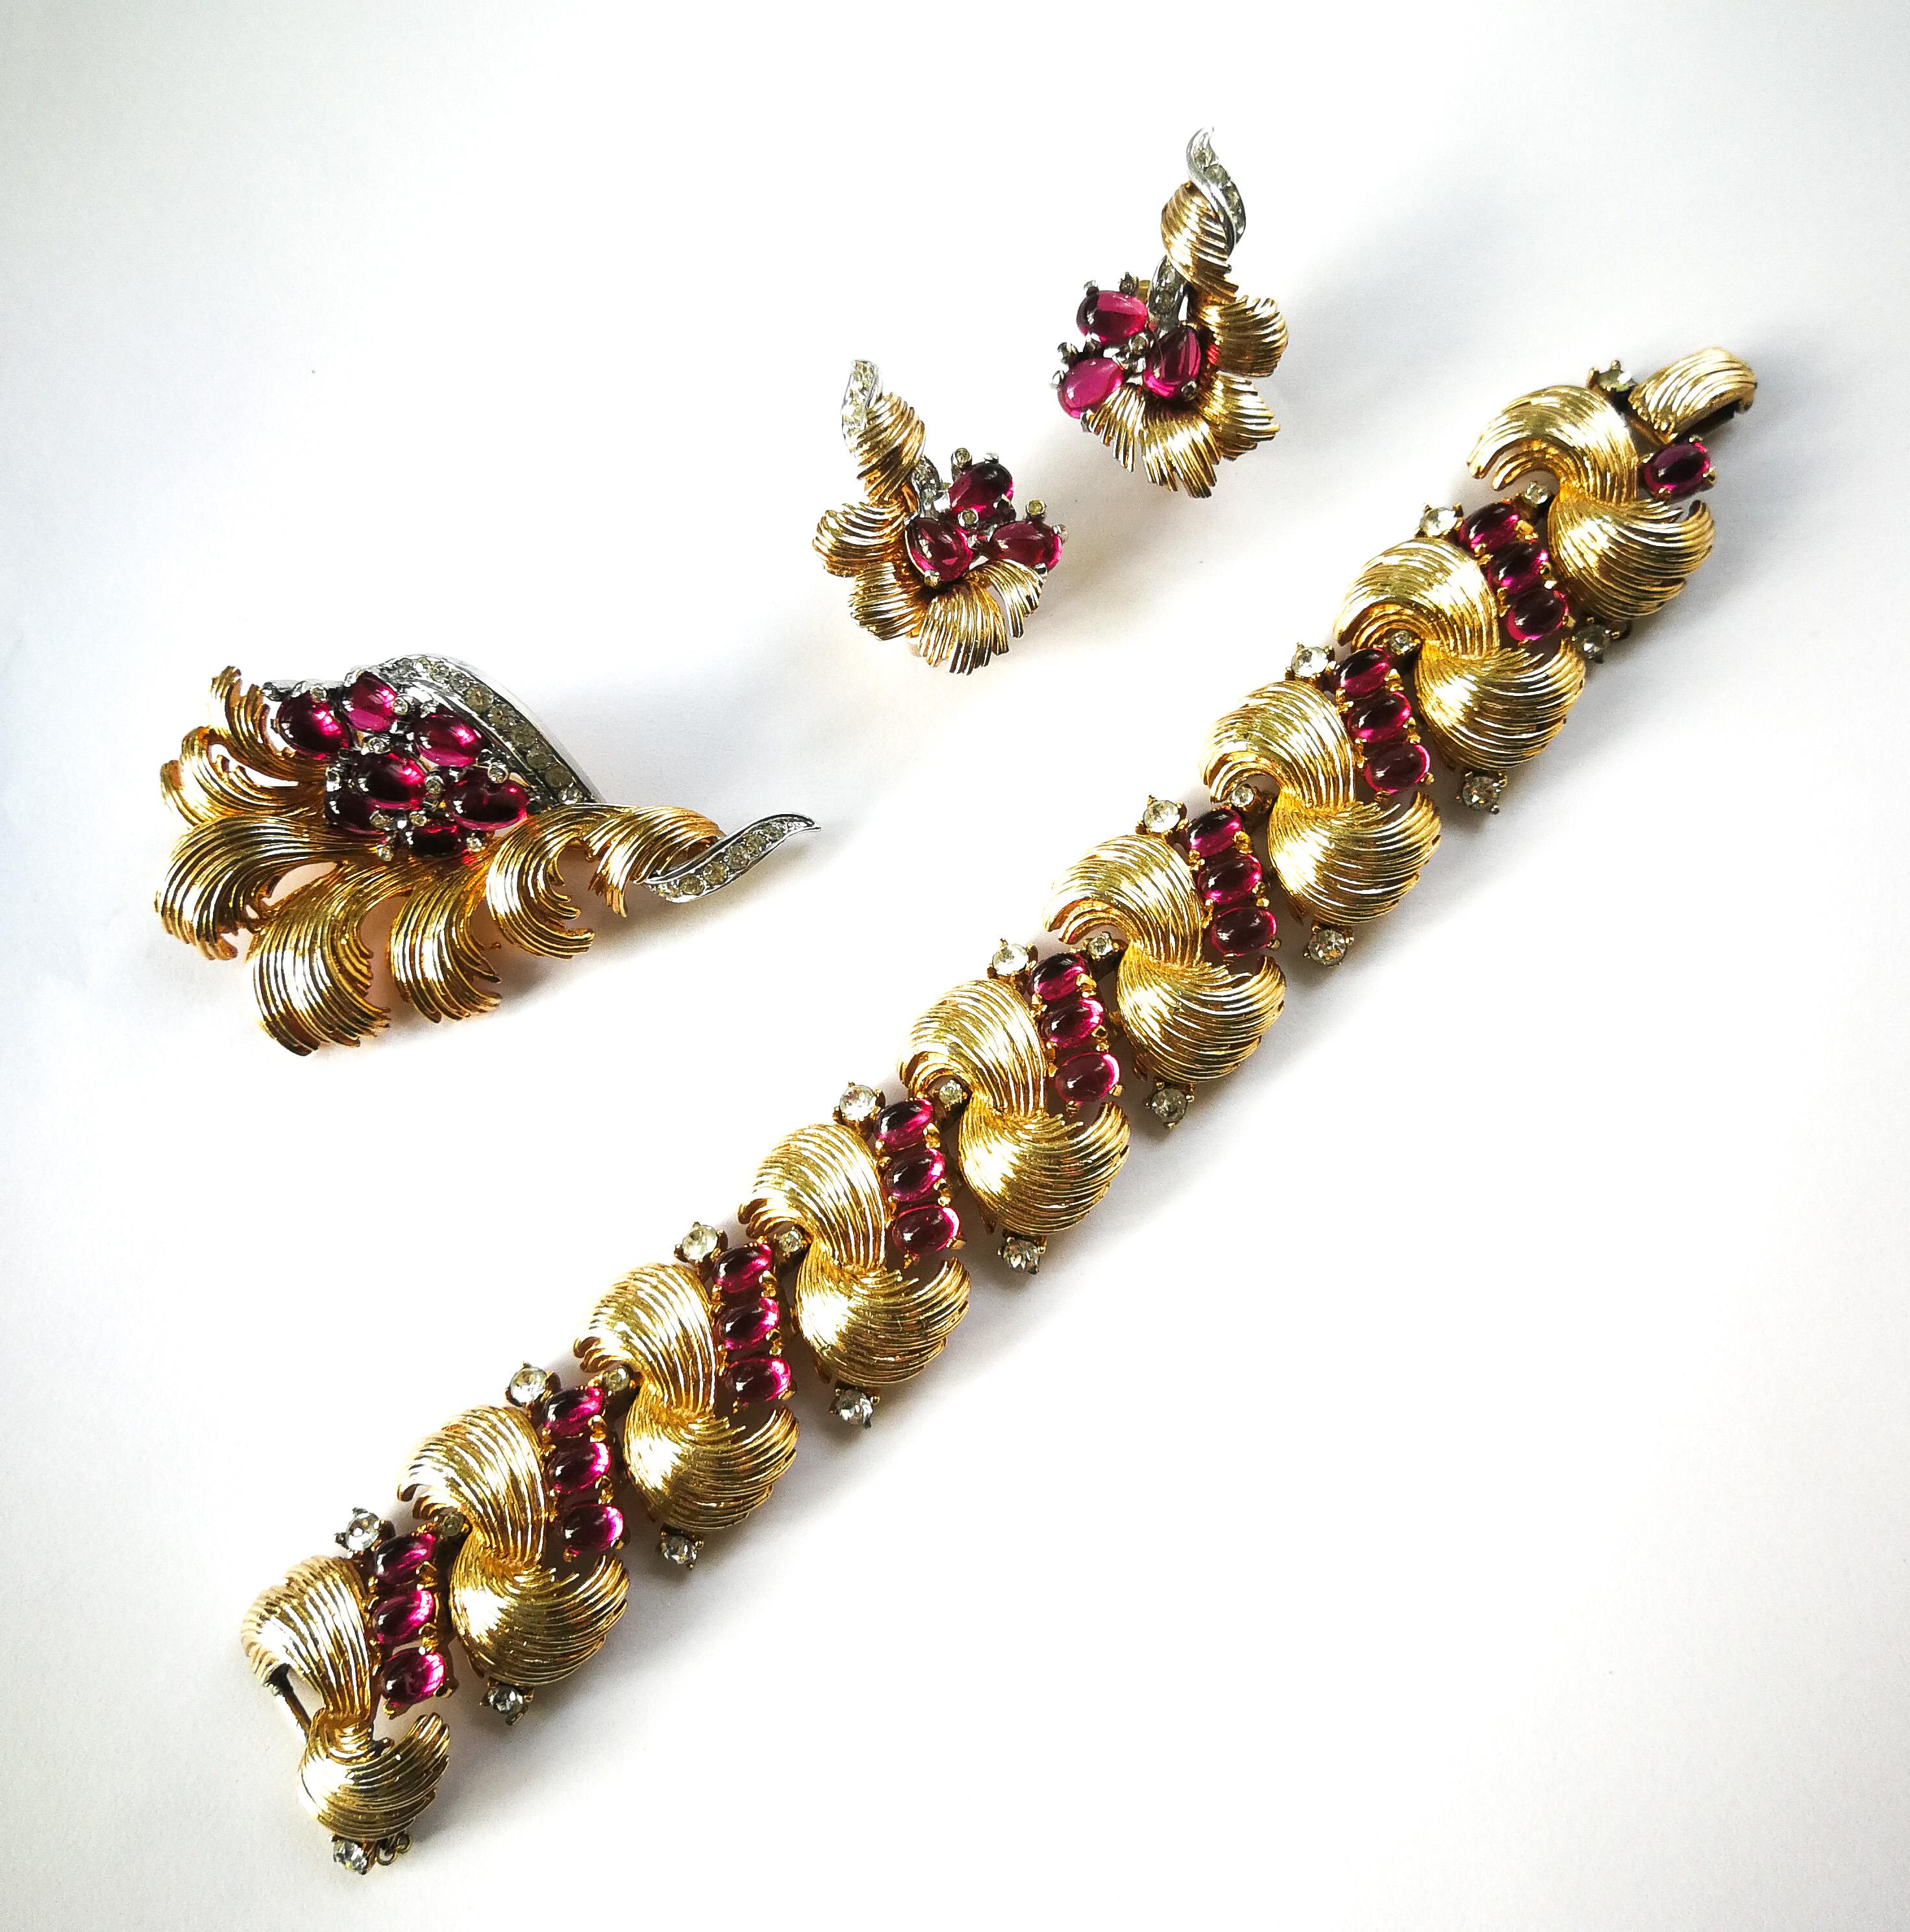 An exquisite and sumptuous three piece set by Marcel Boucher, from the 1960s. An articulated bracelet, with safety chain, a brooch and earrings make up this parure, in an exceptional design, with ruby glass cabuchons set in gilded feather like